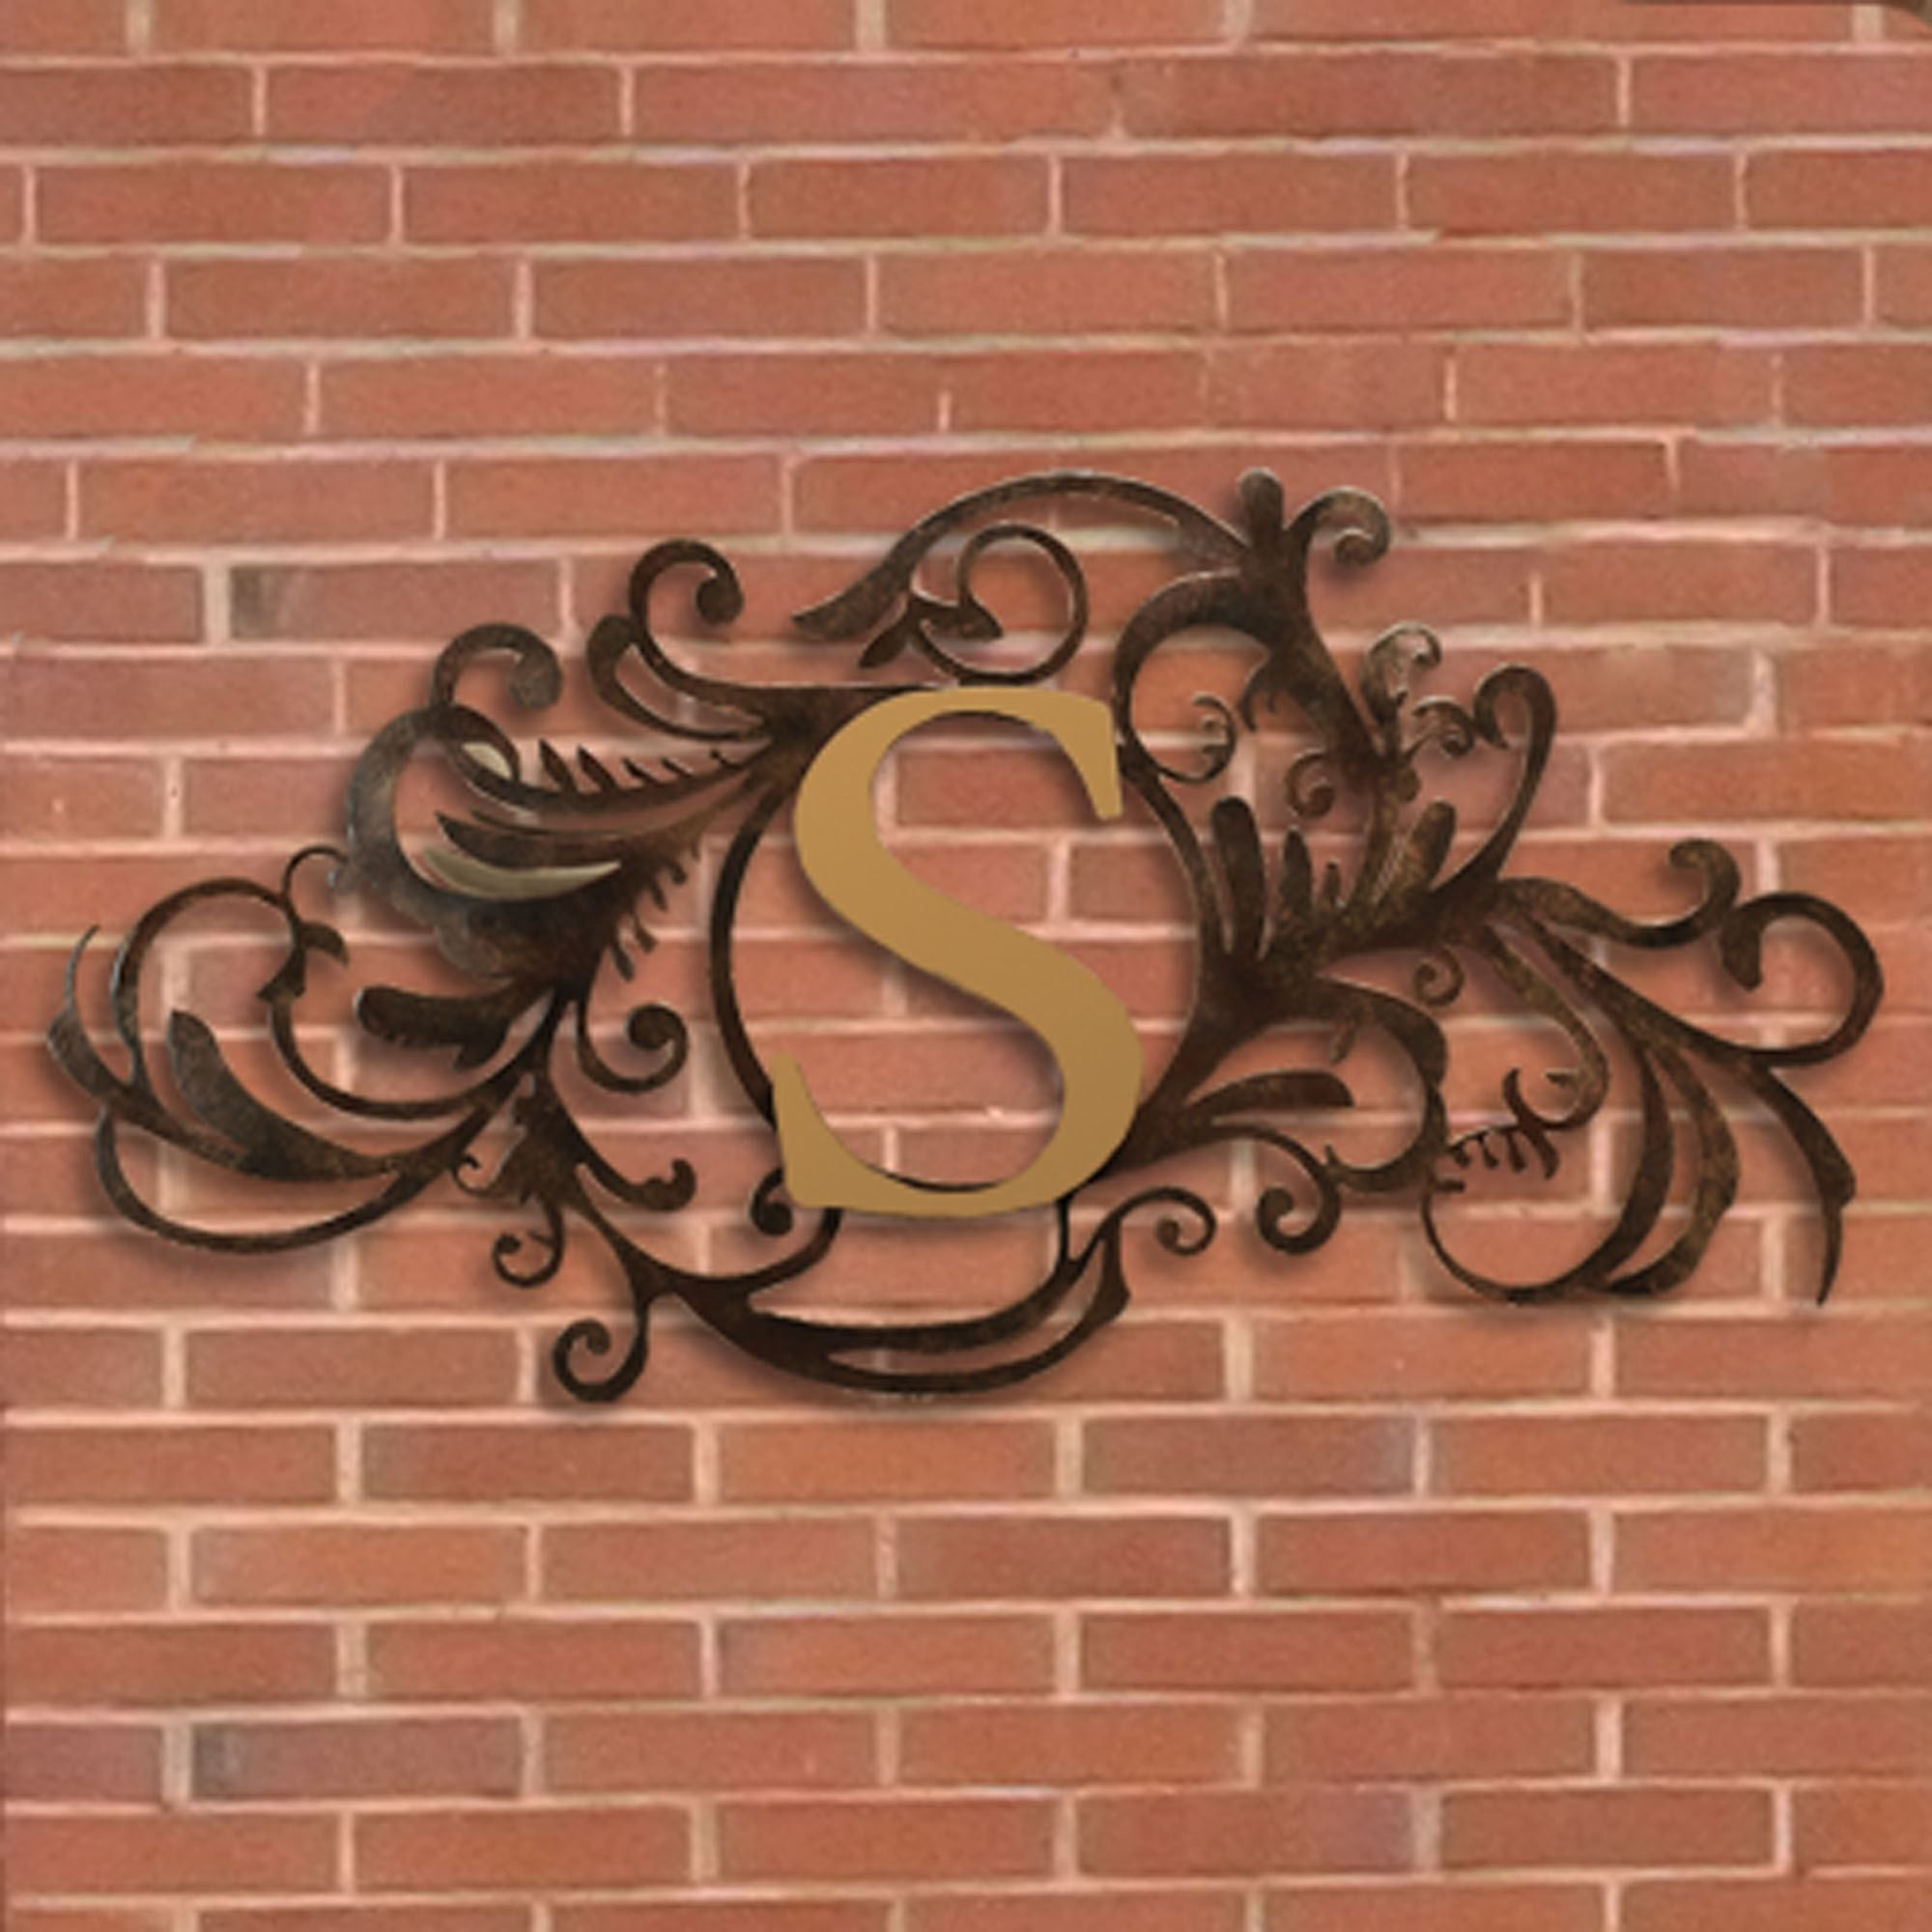 Top 38 Hunky Dory Bronze Wall Art Metal Flower Decor Outdoor In Ornamental Wood And Metal Scroll Wall Decor (View 18 of 30)